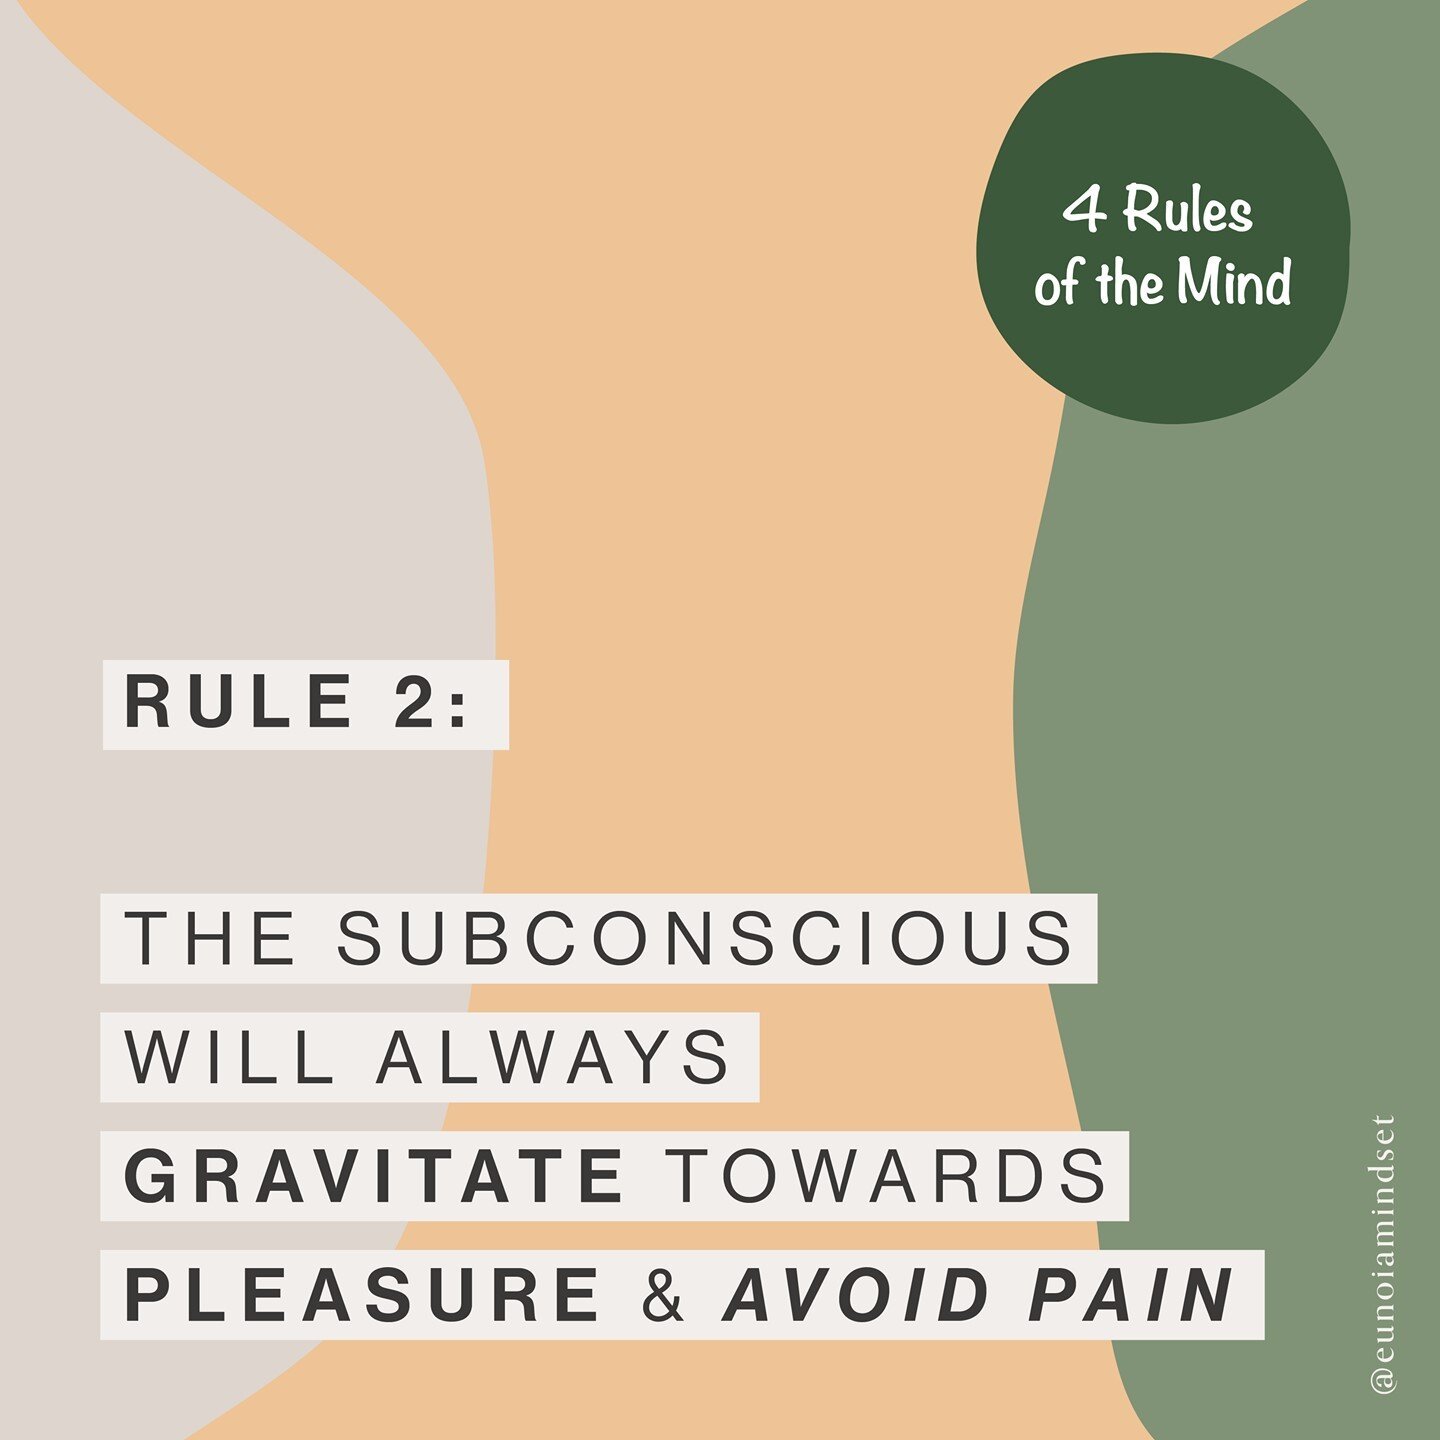 RULE 2: PLEASURE TRUMPS PAIN

This rule, we are certain, comes as no surprise. 

This rule lies at the core of all transformation and is the reason that all those attempts you made to quit or change that habit, never worked!

Ever
...struggled with a